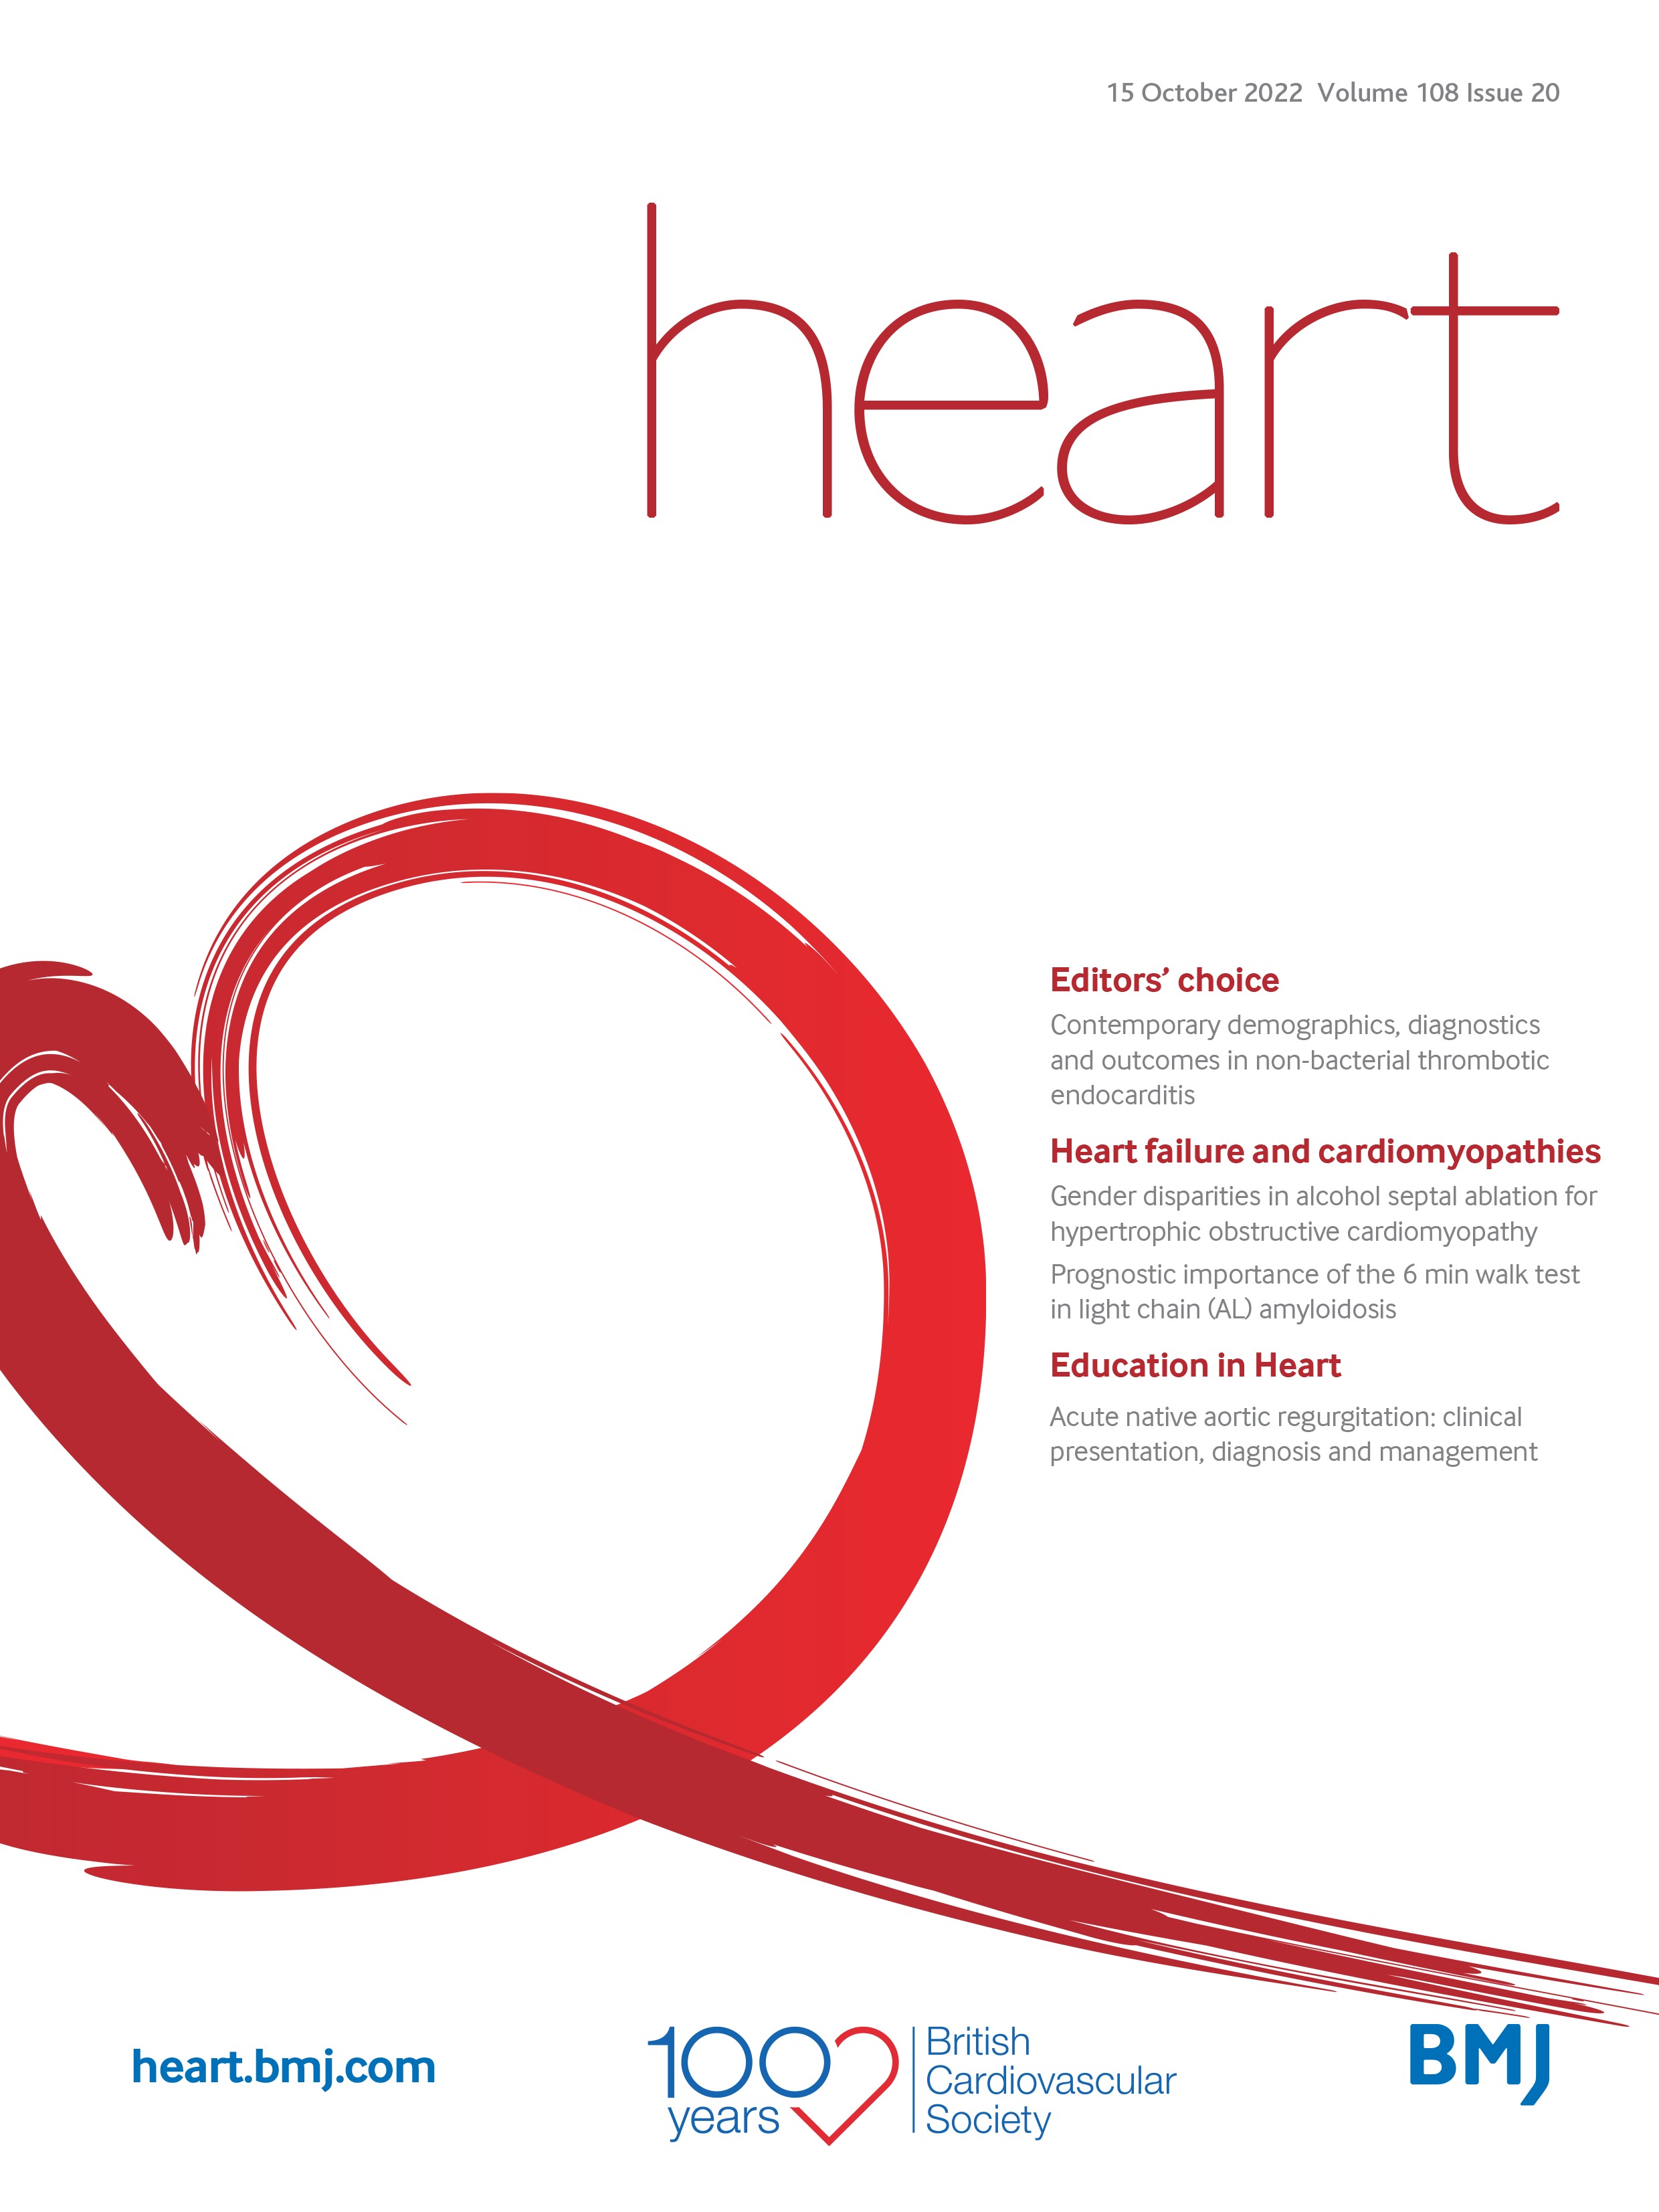 Gender disparities in alcohol septal ablation for hypertrophic obstructive cardiomyopathy